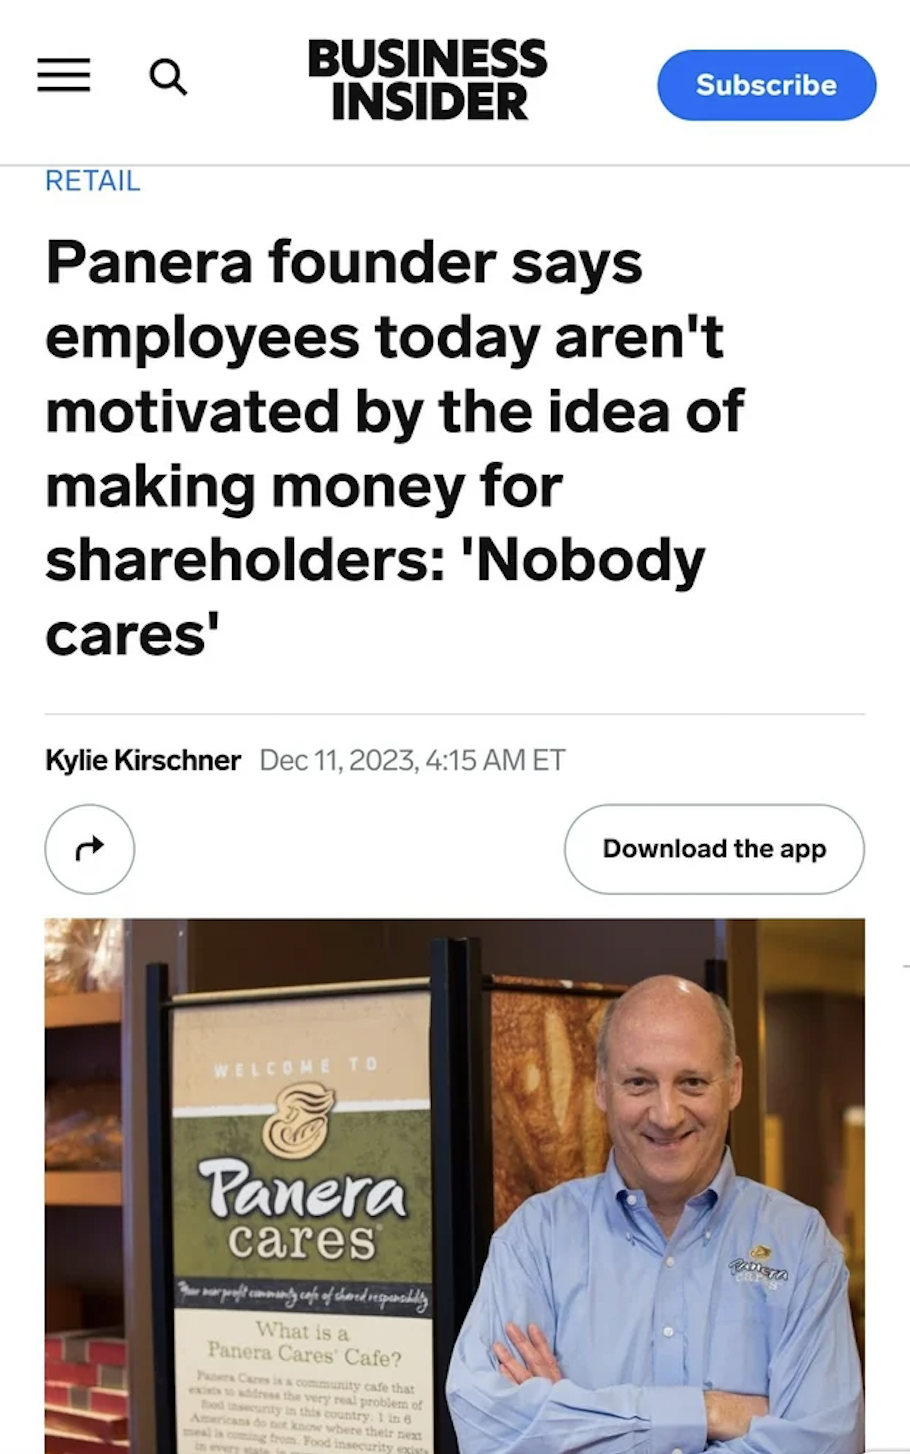 media - Q Retail Business Insider Panera founder says employees today aren't motivated by the idea of making money for holders 'Nobody cares' Kylie Kirschner , Et Subscribe Panera cares ne ser profi samanty cap af dan padly Pt Cares Cade Download the app